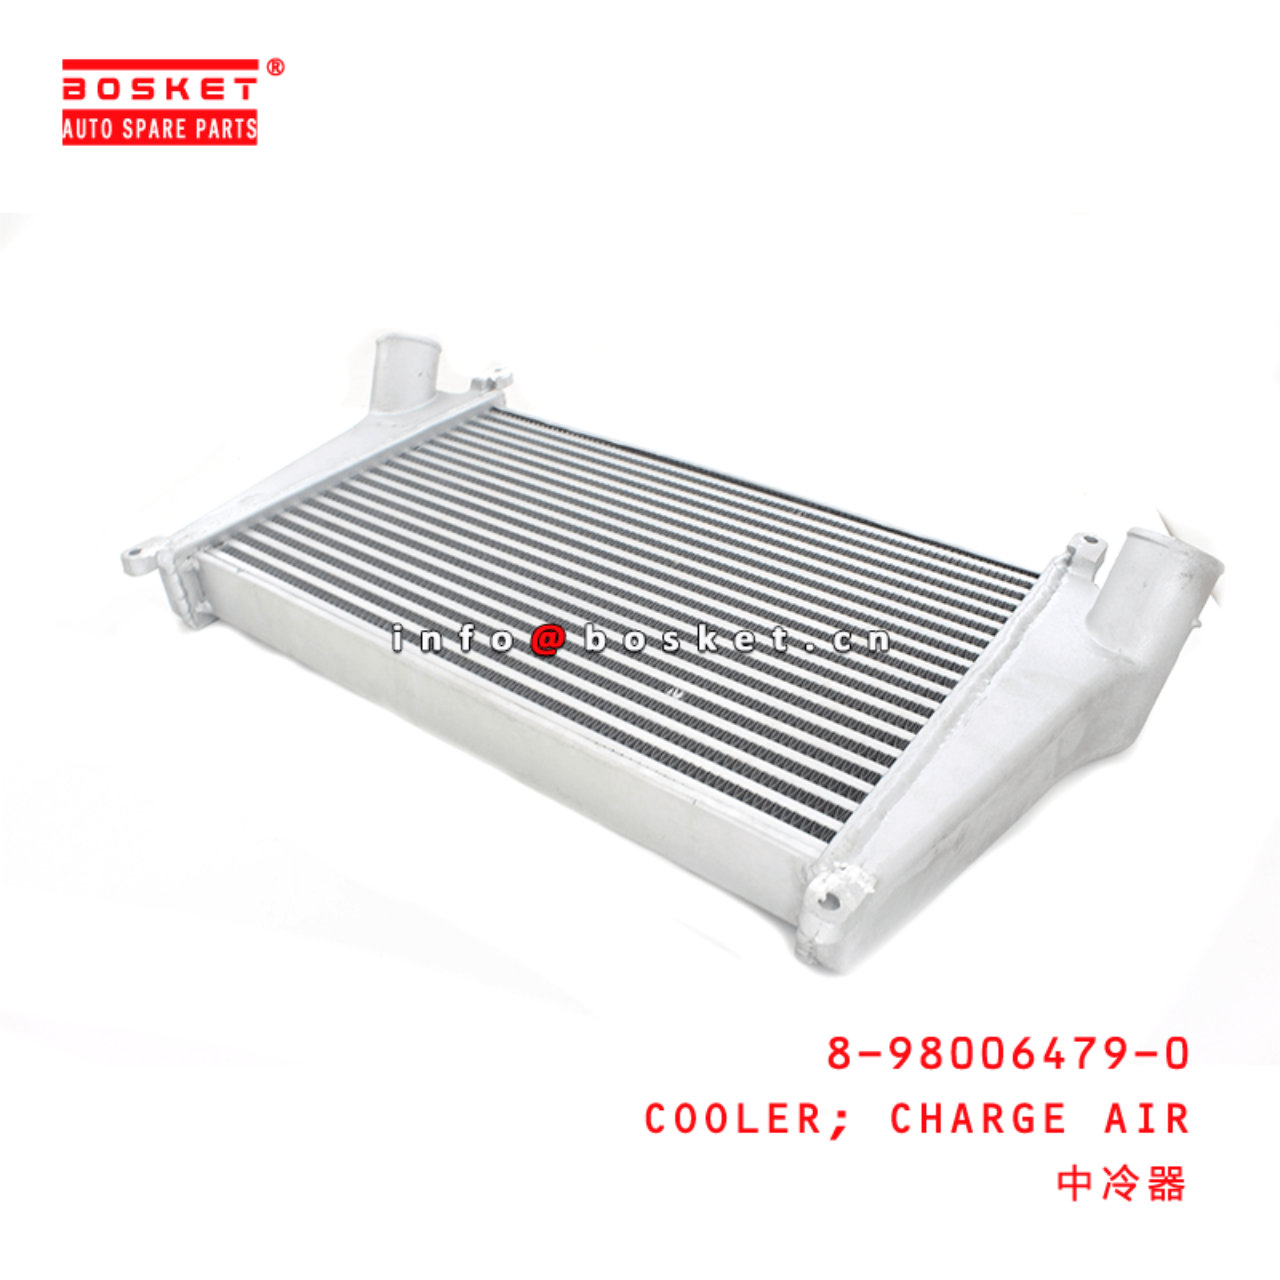  8-98006479-0 Charge Air Cooler 8980064790 Suitable for ISUZU 700P NPR75 NQR75